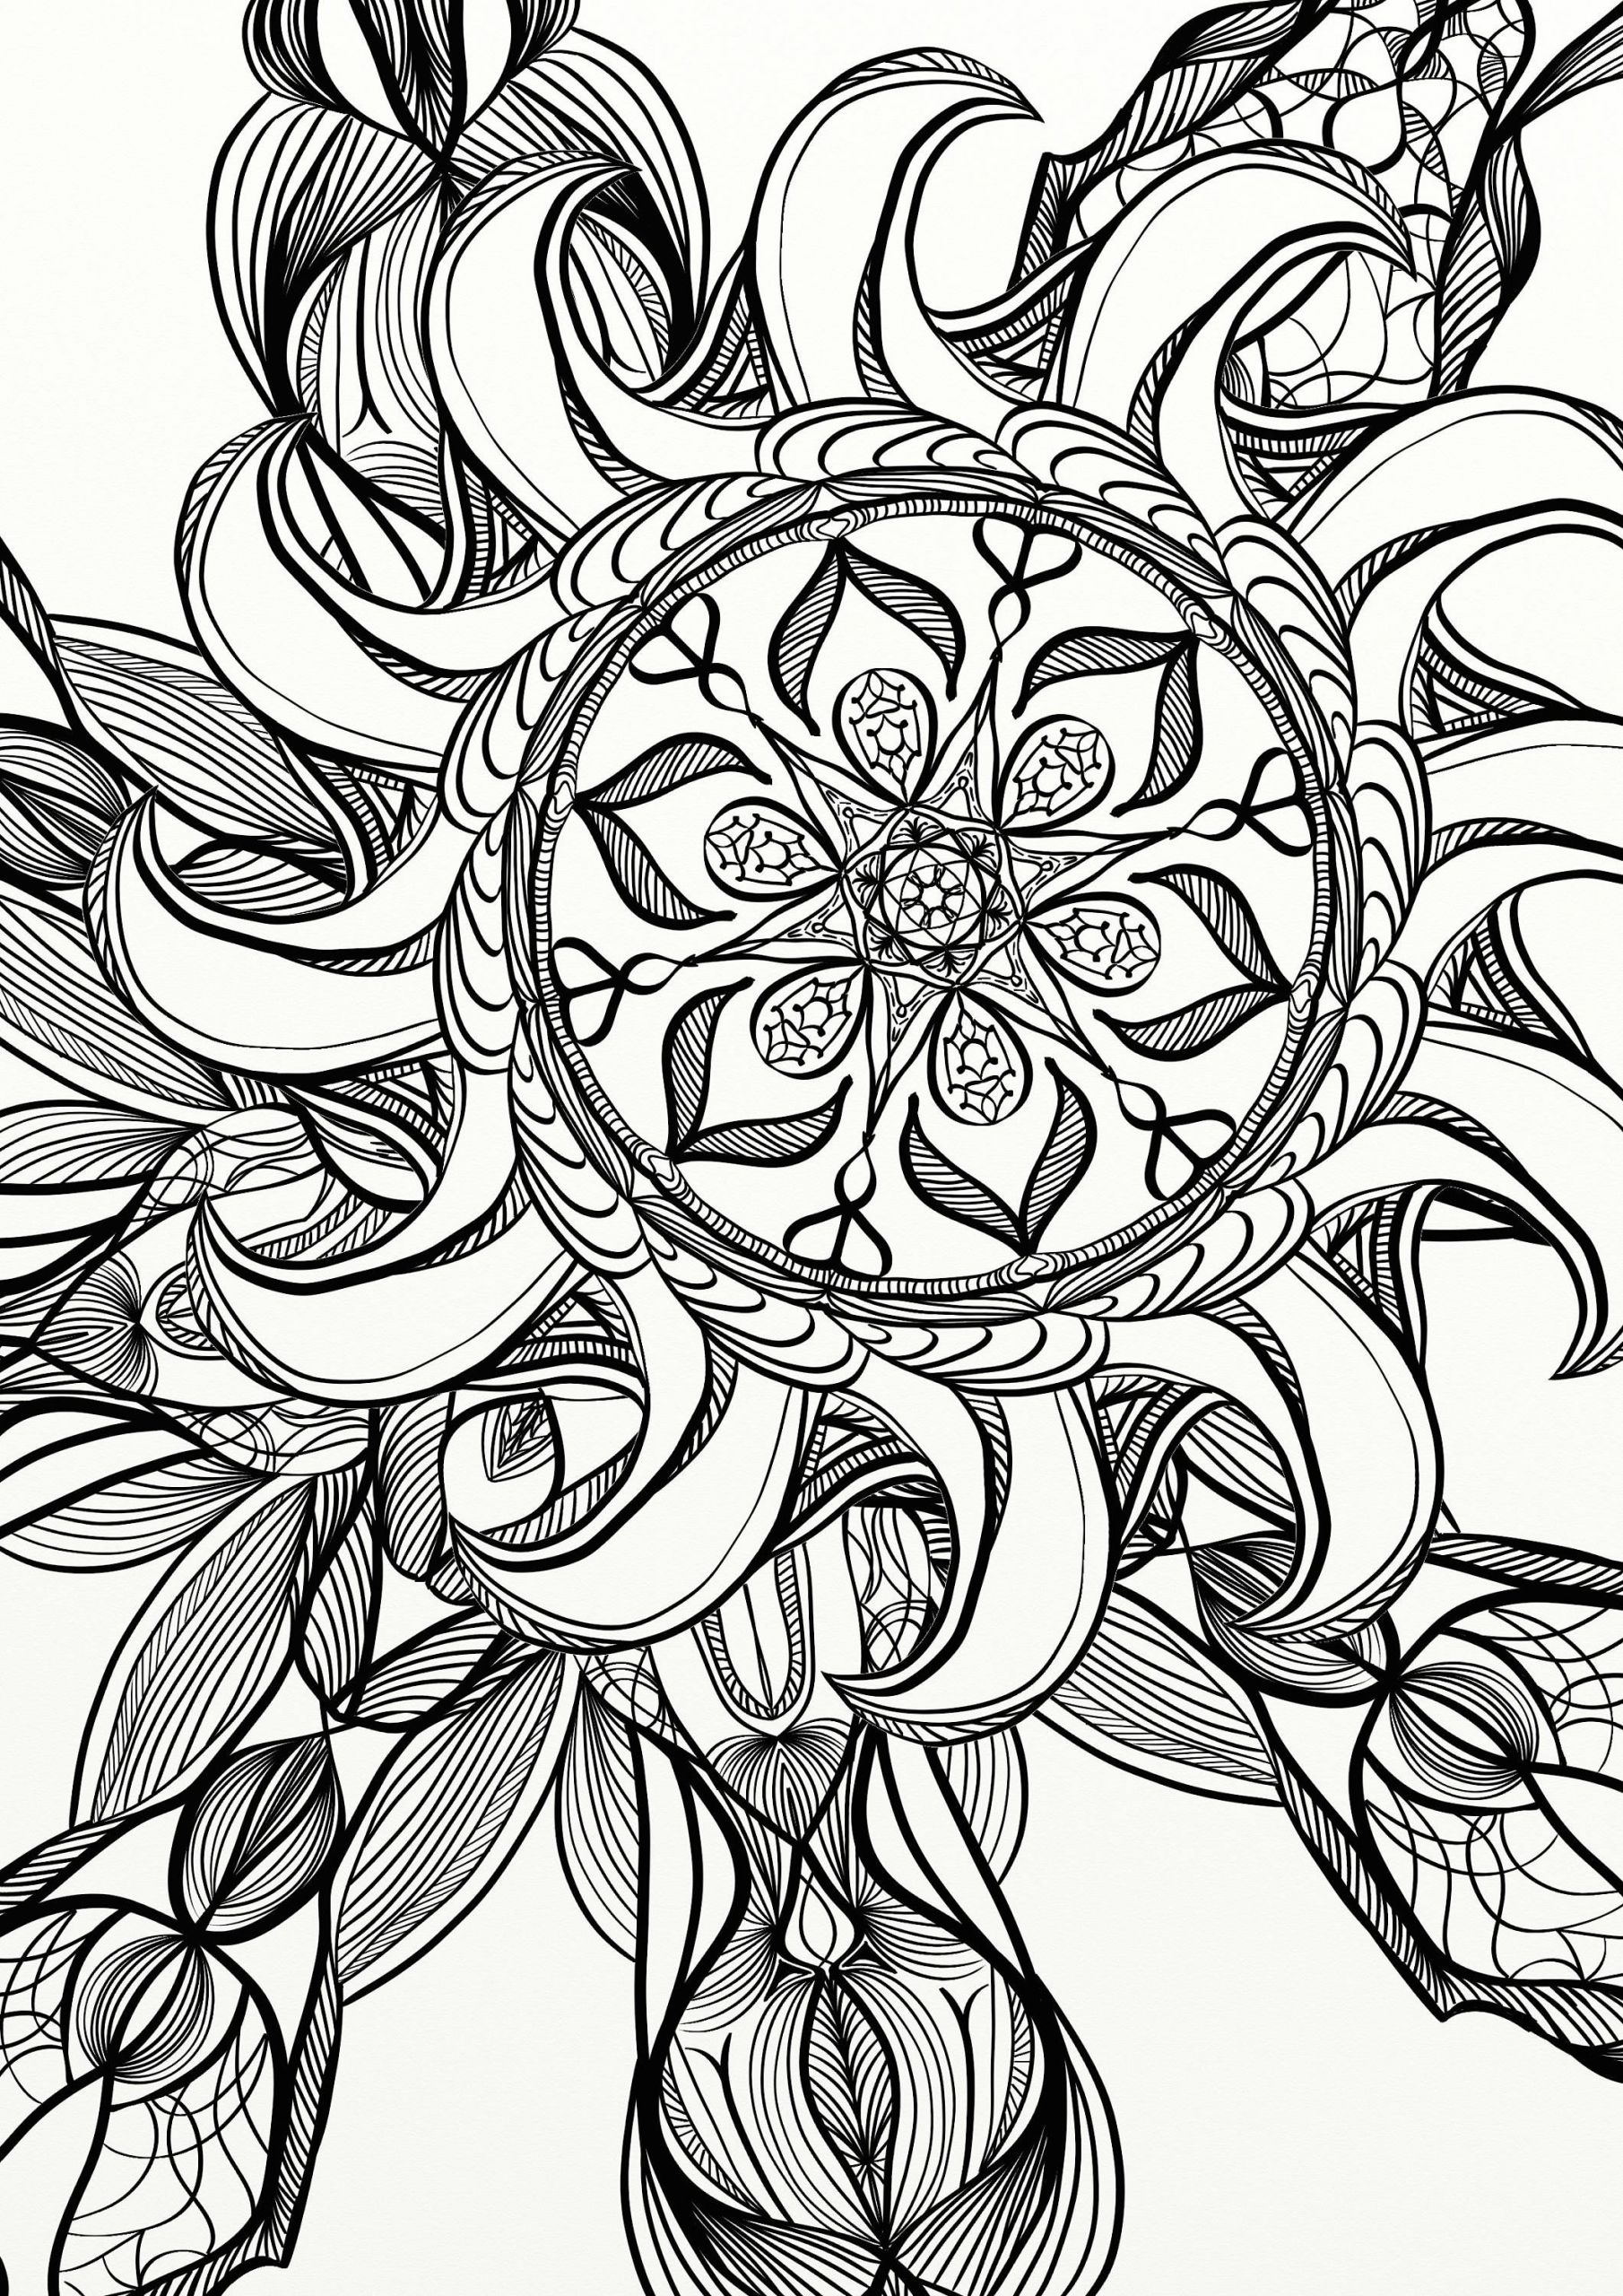 Coloring Pages For Adults To Print
 Mandala Spiral Relaxing Adult Coloring Page